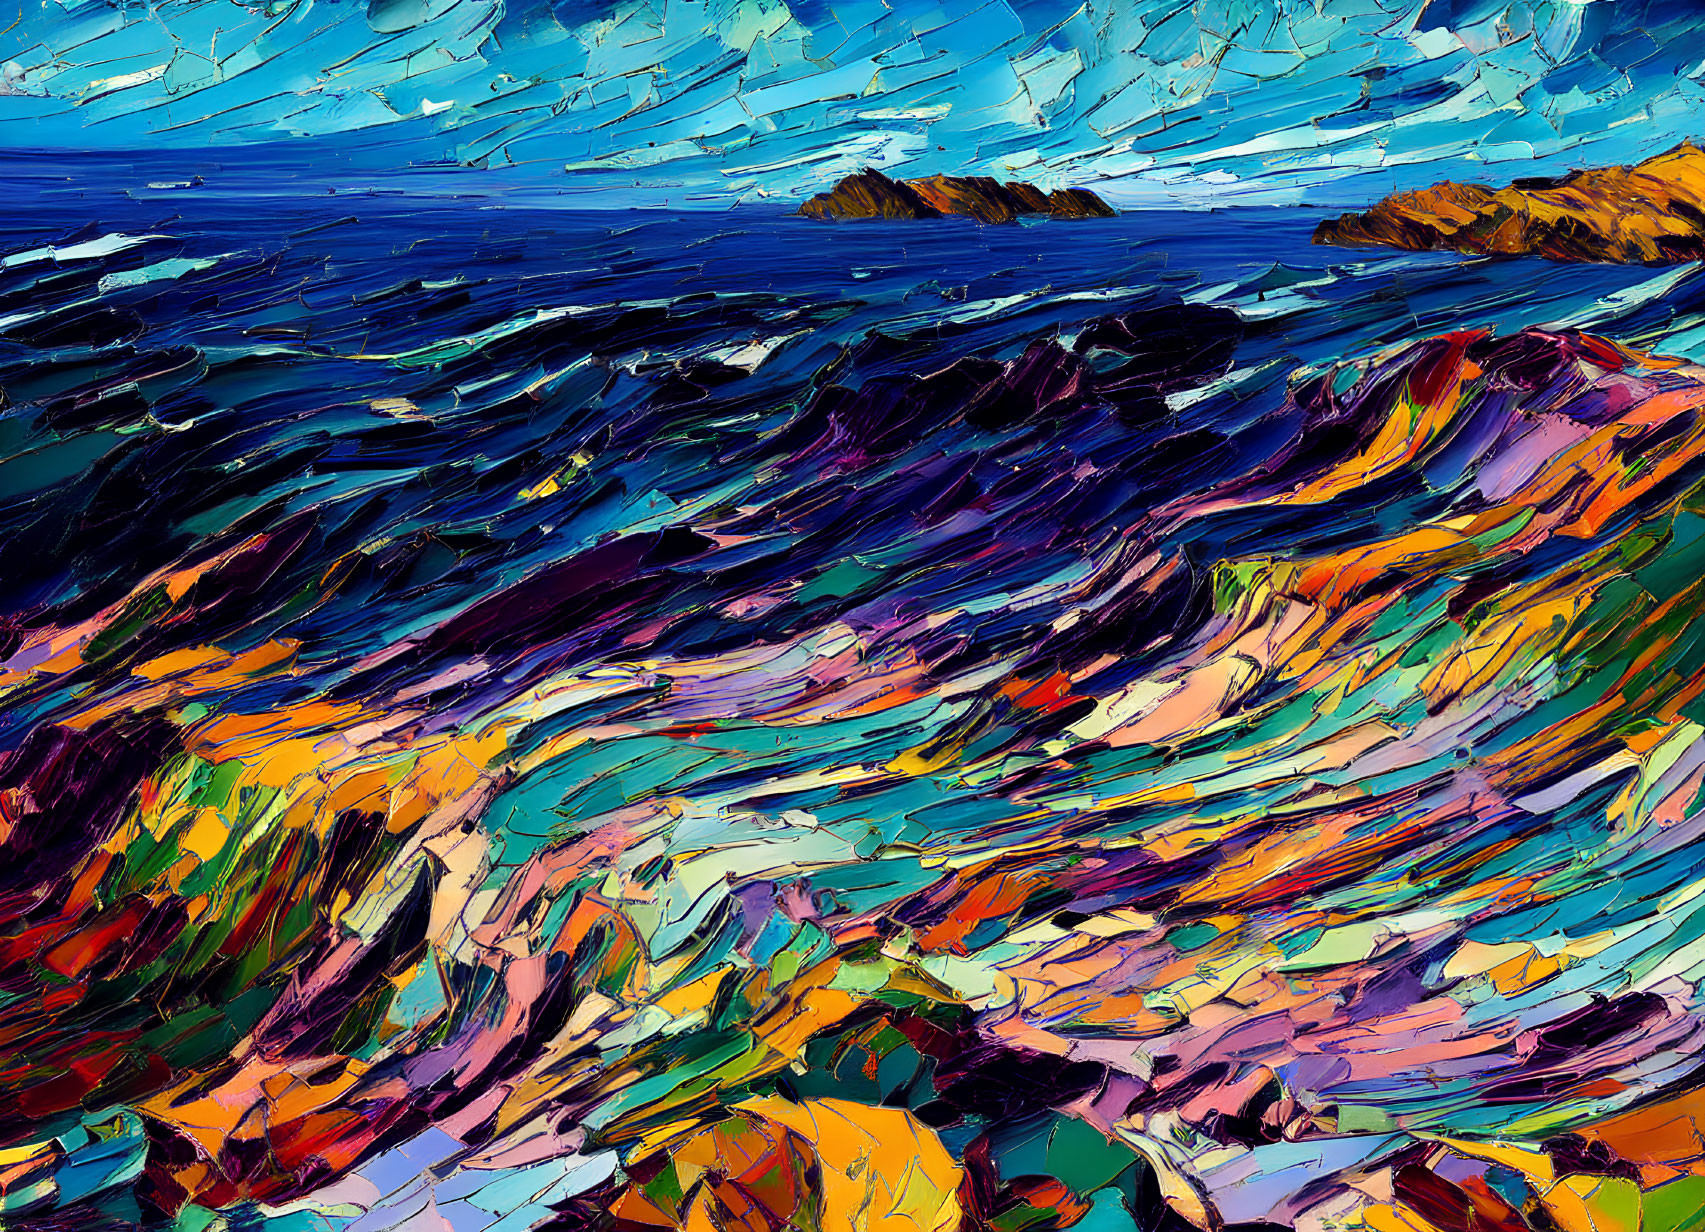 Colorful Abstract Painting of Dynamic Seascape